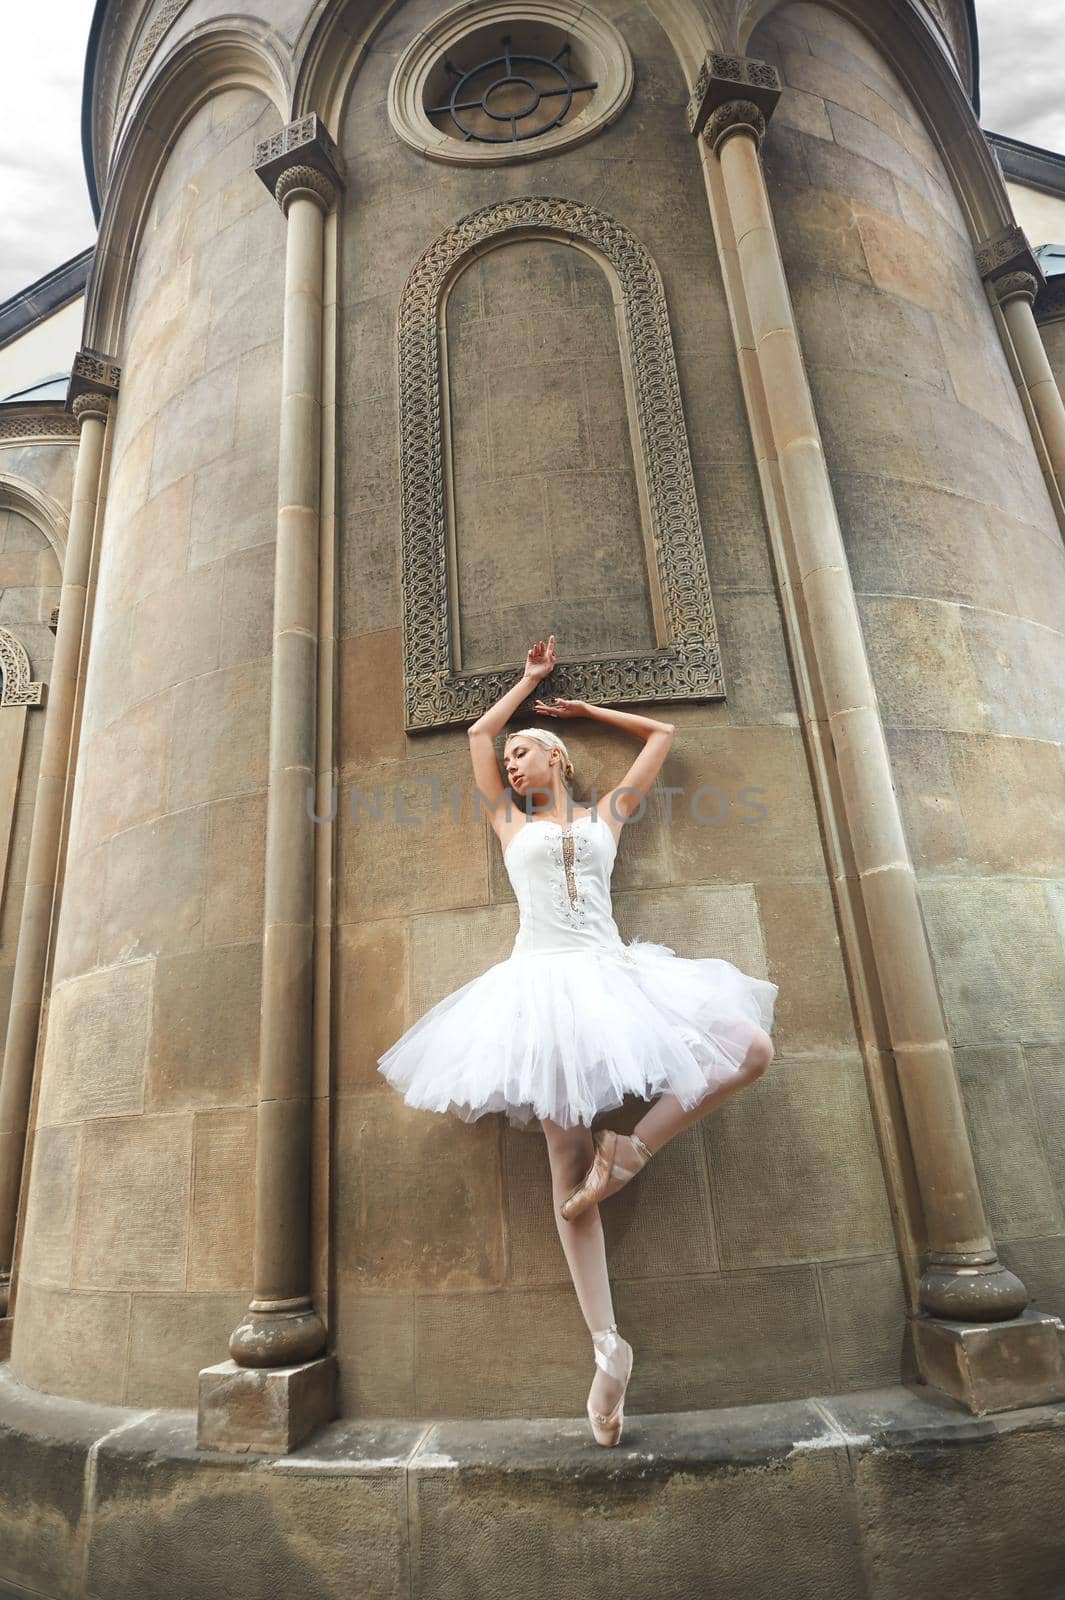 Ballerina performing near an old castle by SerhiiBobyk